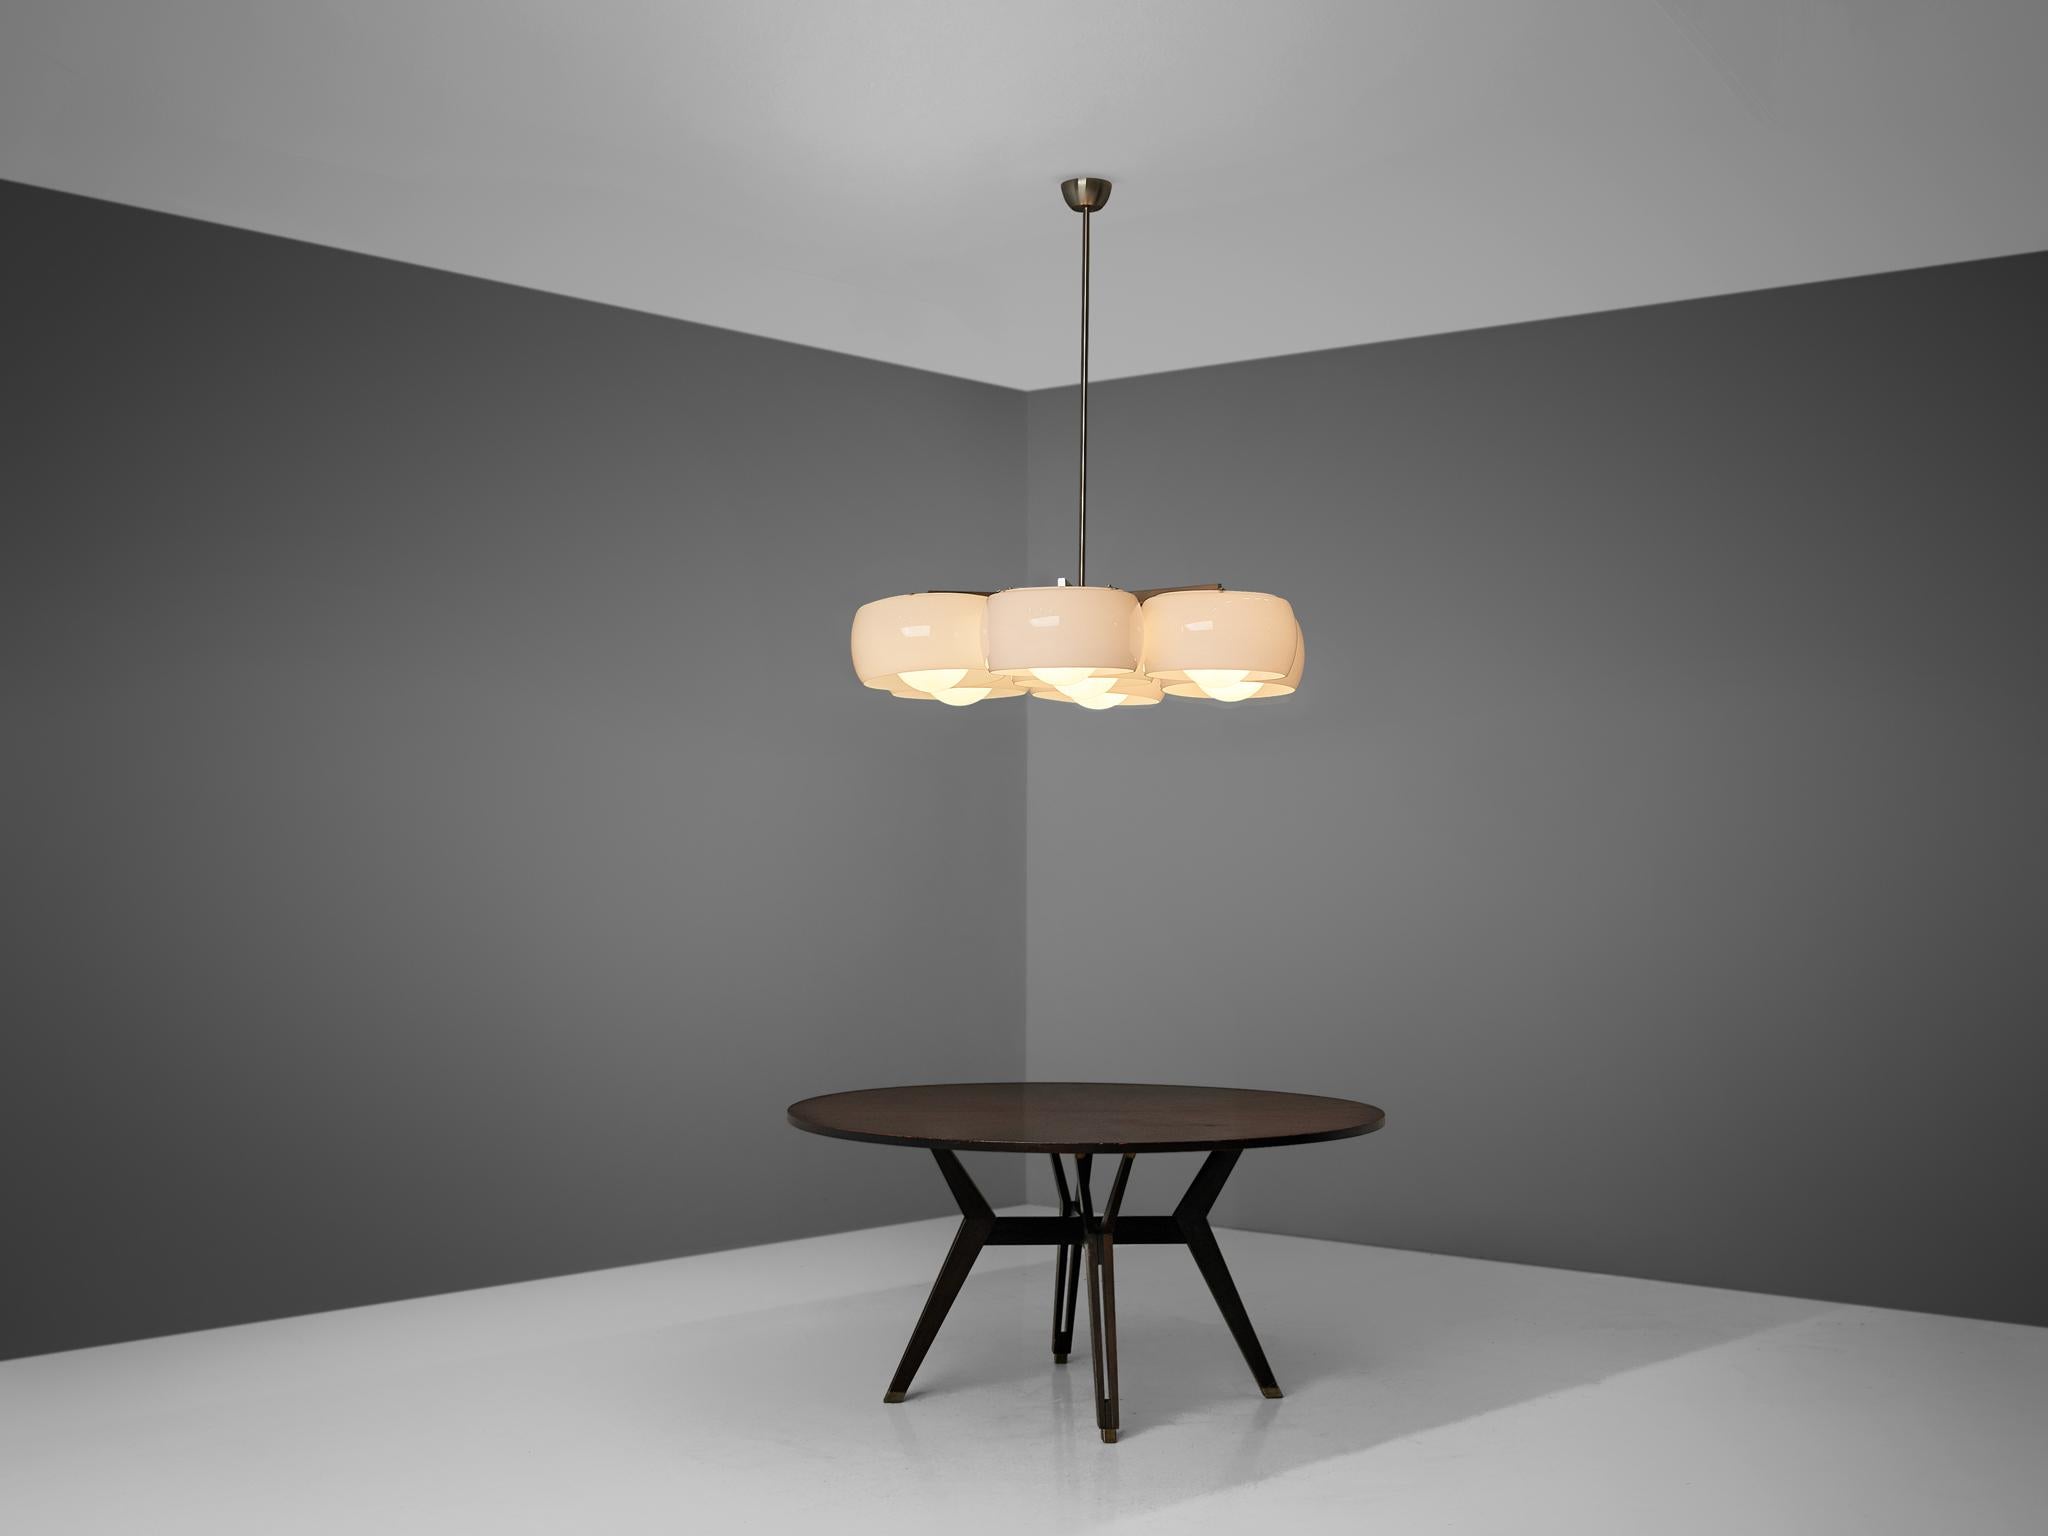 Listing for KNS: Vico Magistretti for Artemide Chandelier 'Eptaclinio' 4